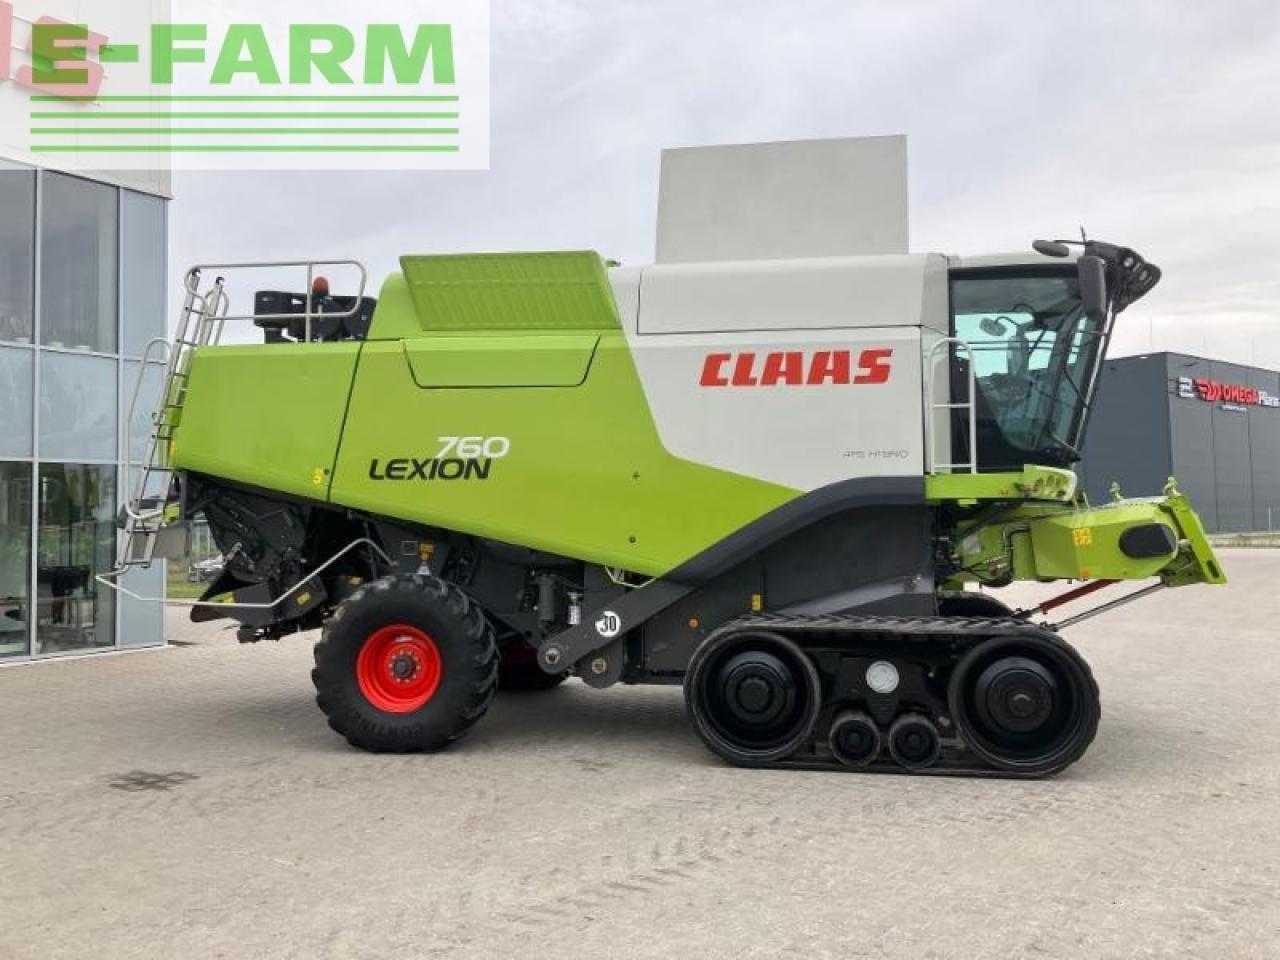 Combine harvester CLAAS lexion 760 terra trac: picture 2